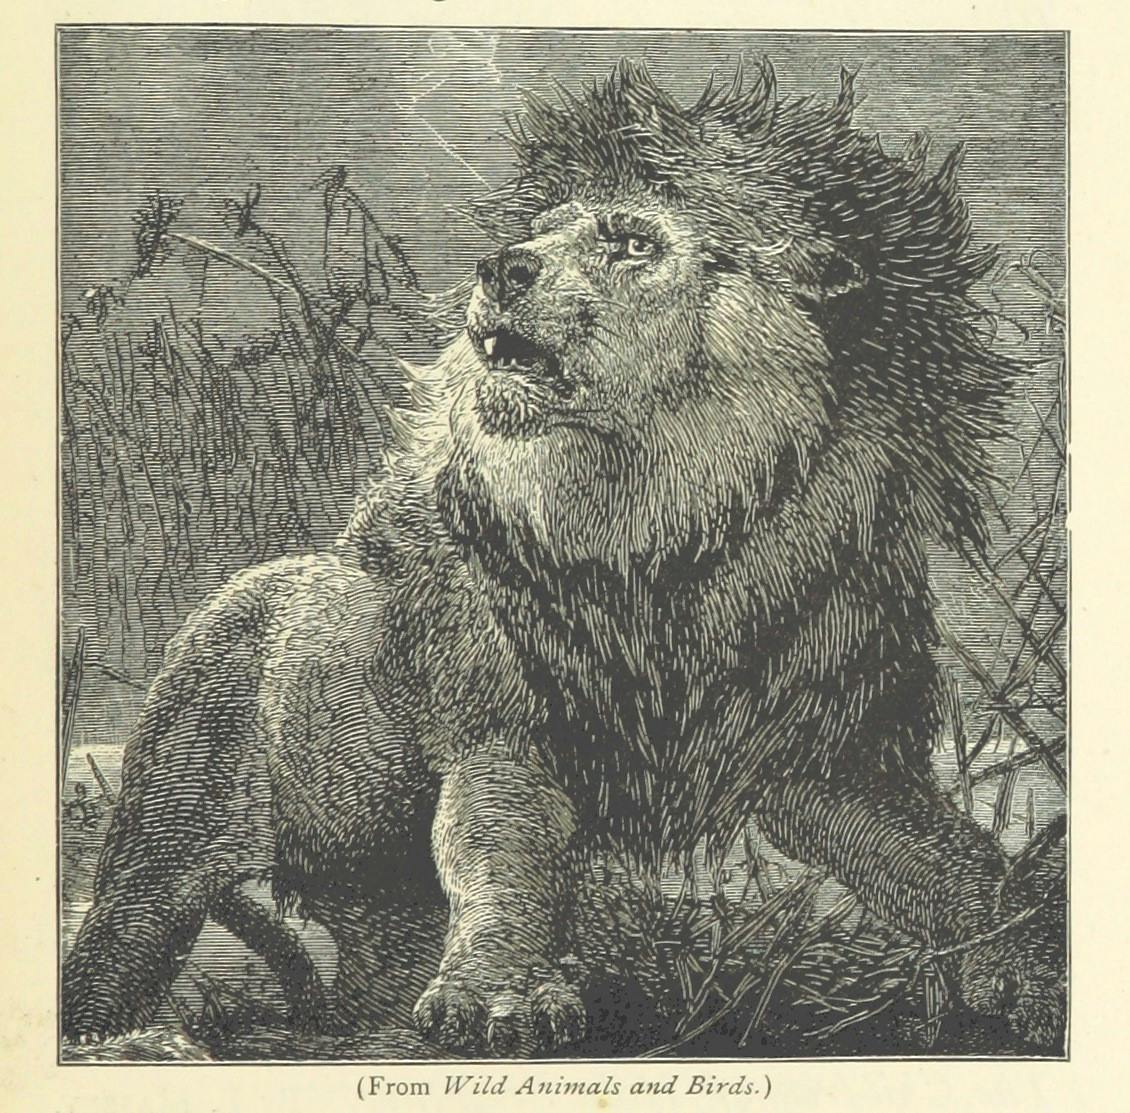 A pencil drawing of a lion from "Wild Animals and Birds"